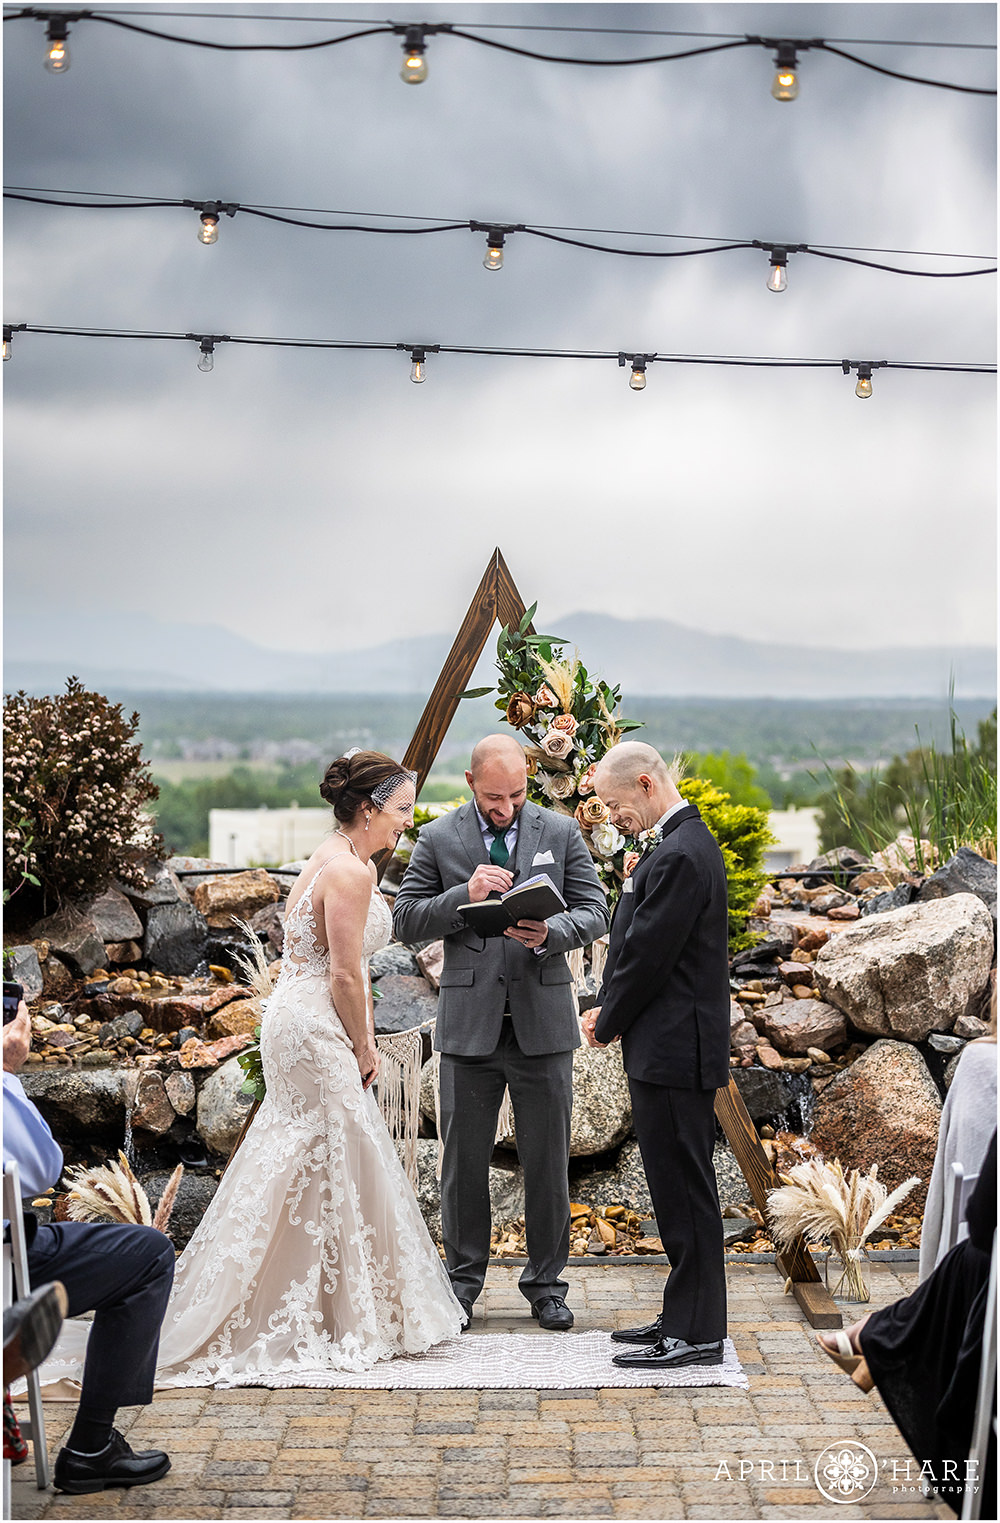 A couple married for 20 years renews their marriage vows at an outdoor celebration in Littleton Colorado